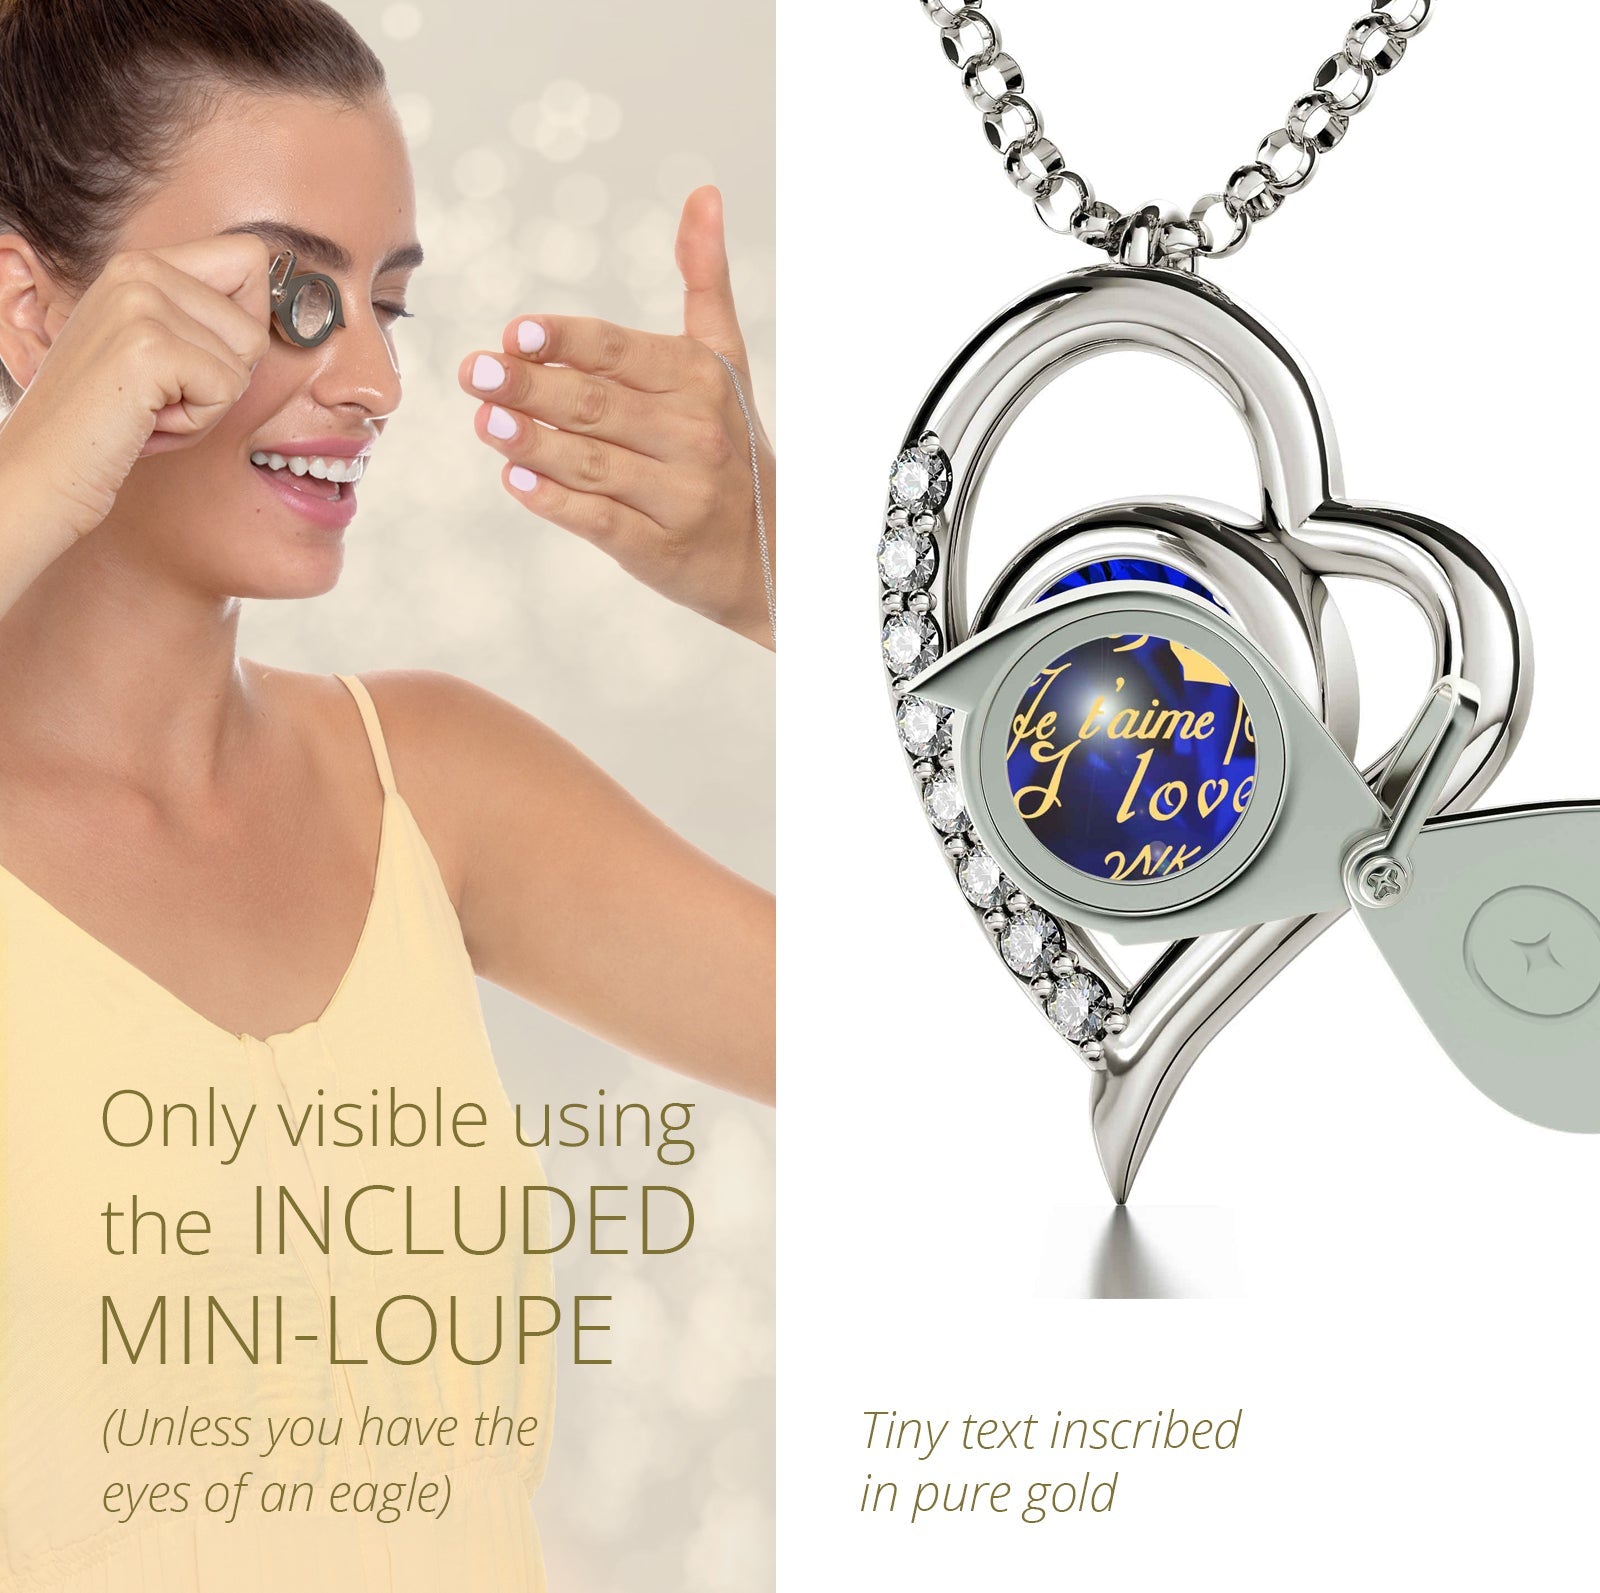 Close-up view of a 925 Sterling Silver I Love You Heart Pendant Necklace featuring a deep blue gemstone engraved with "i love you" in multiple languages, set in a polished silver band—perfect as an anniversary gift for her.